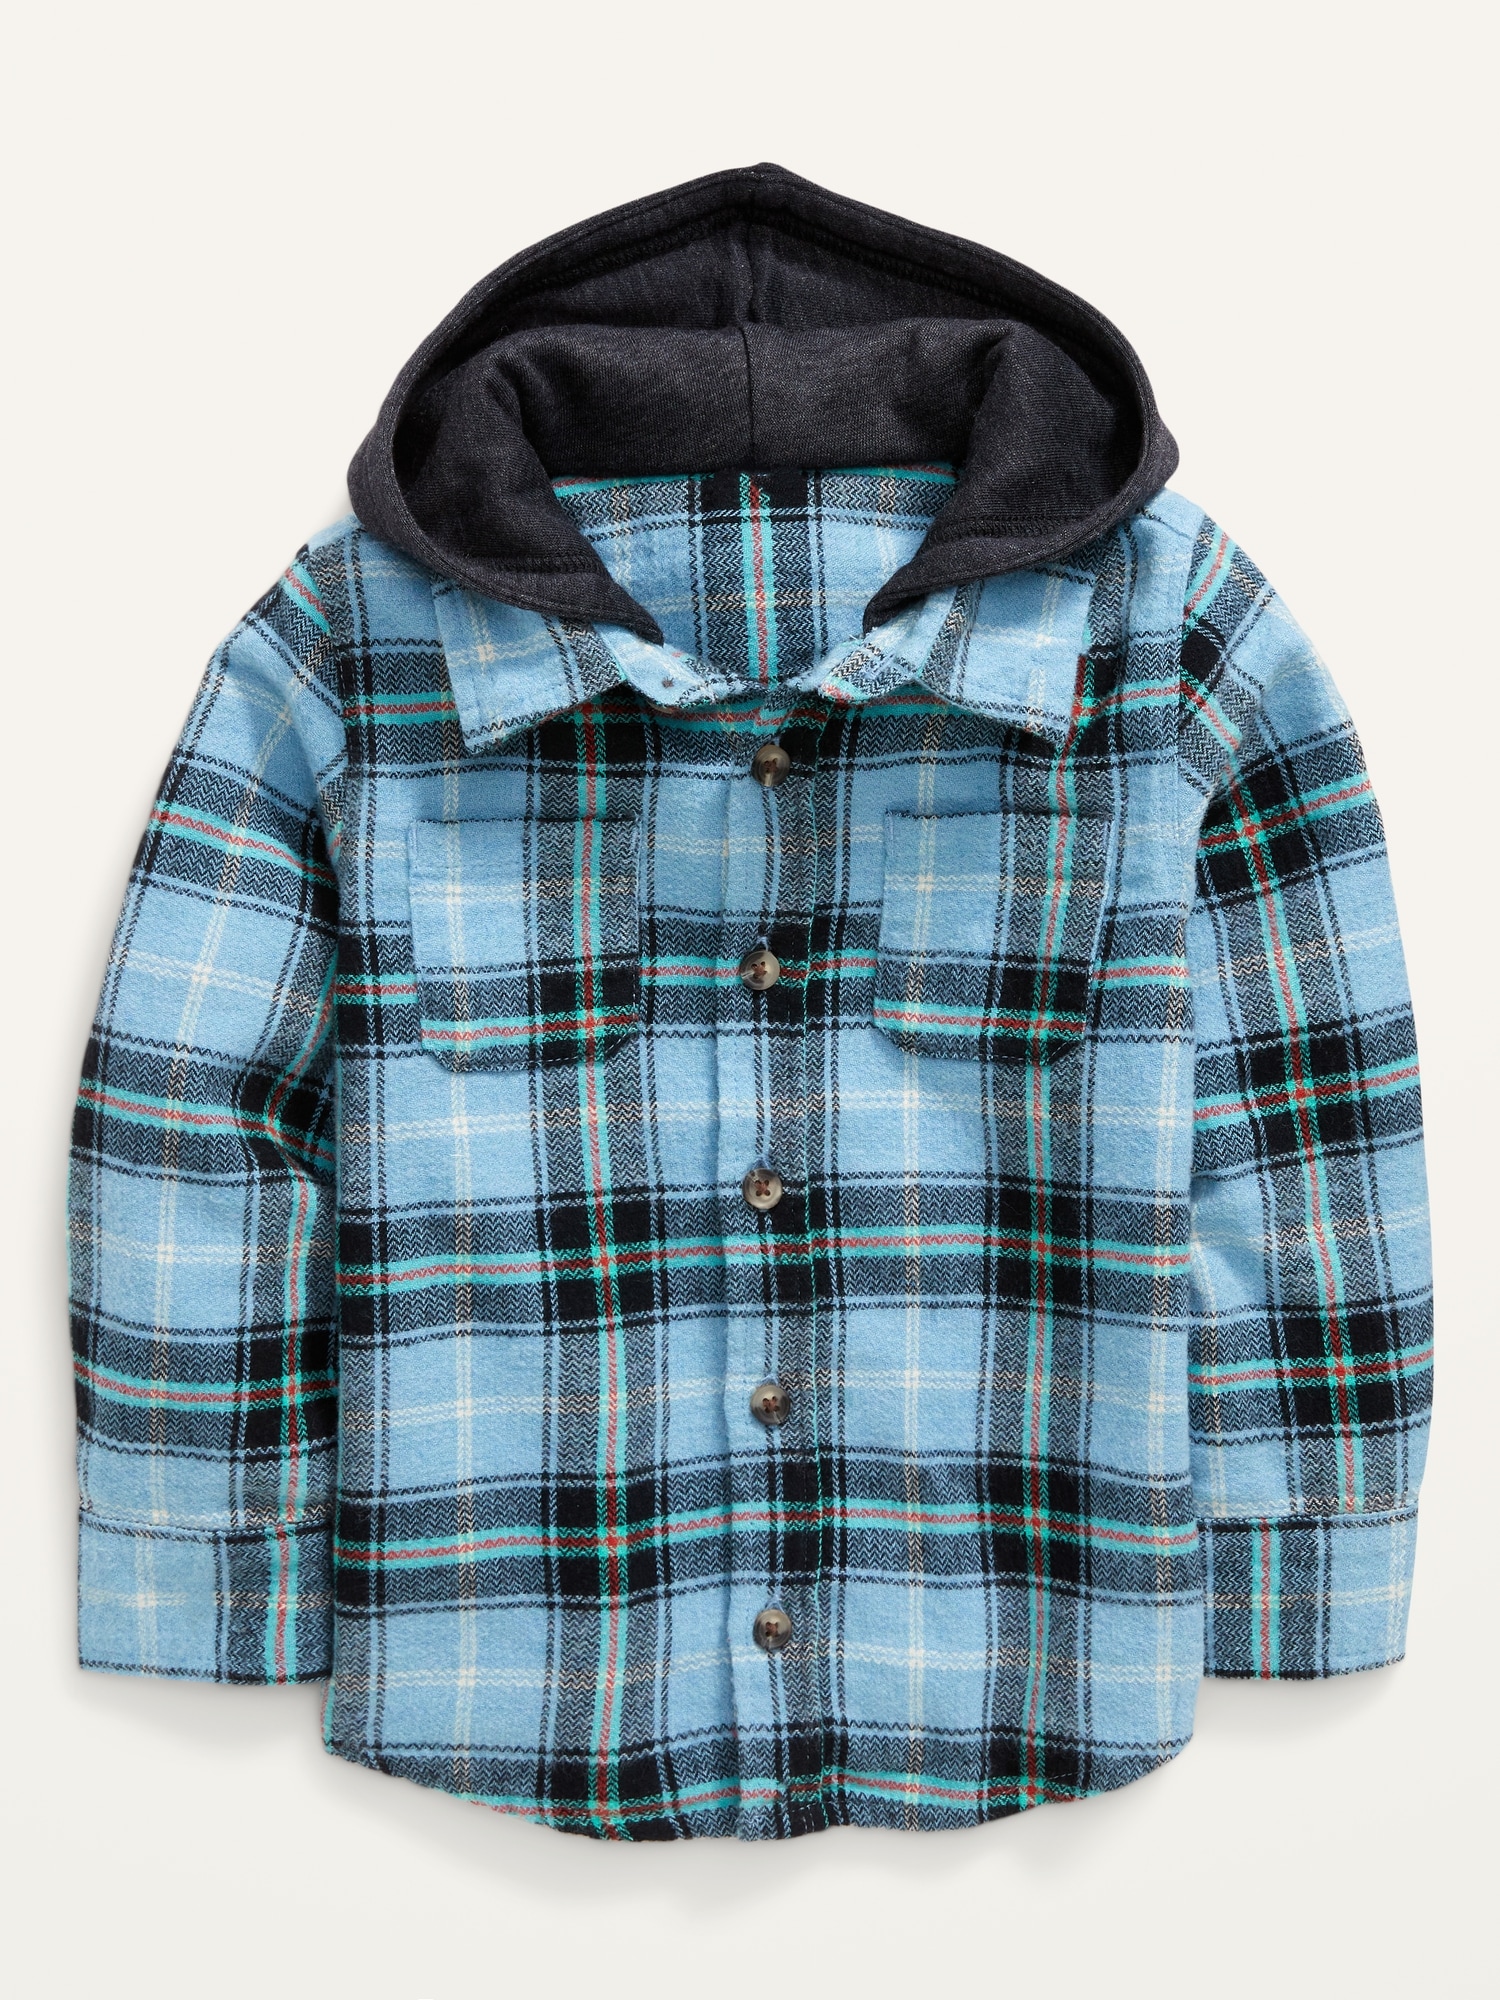 Unisex 2-in-1 Hooded Flannel Shirt for Toddler | Old Navy